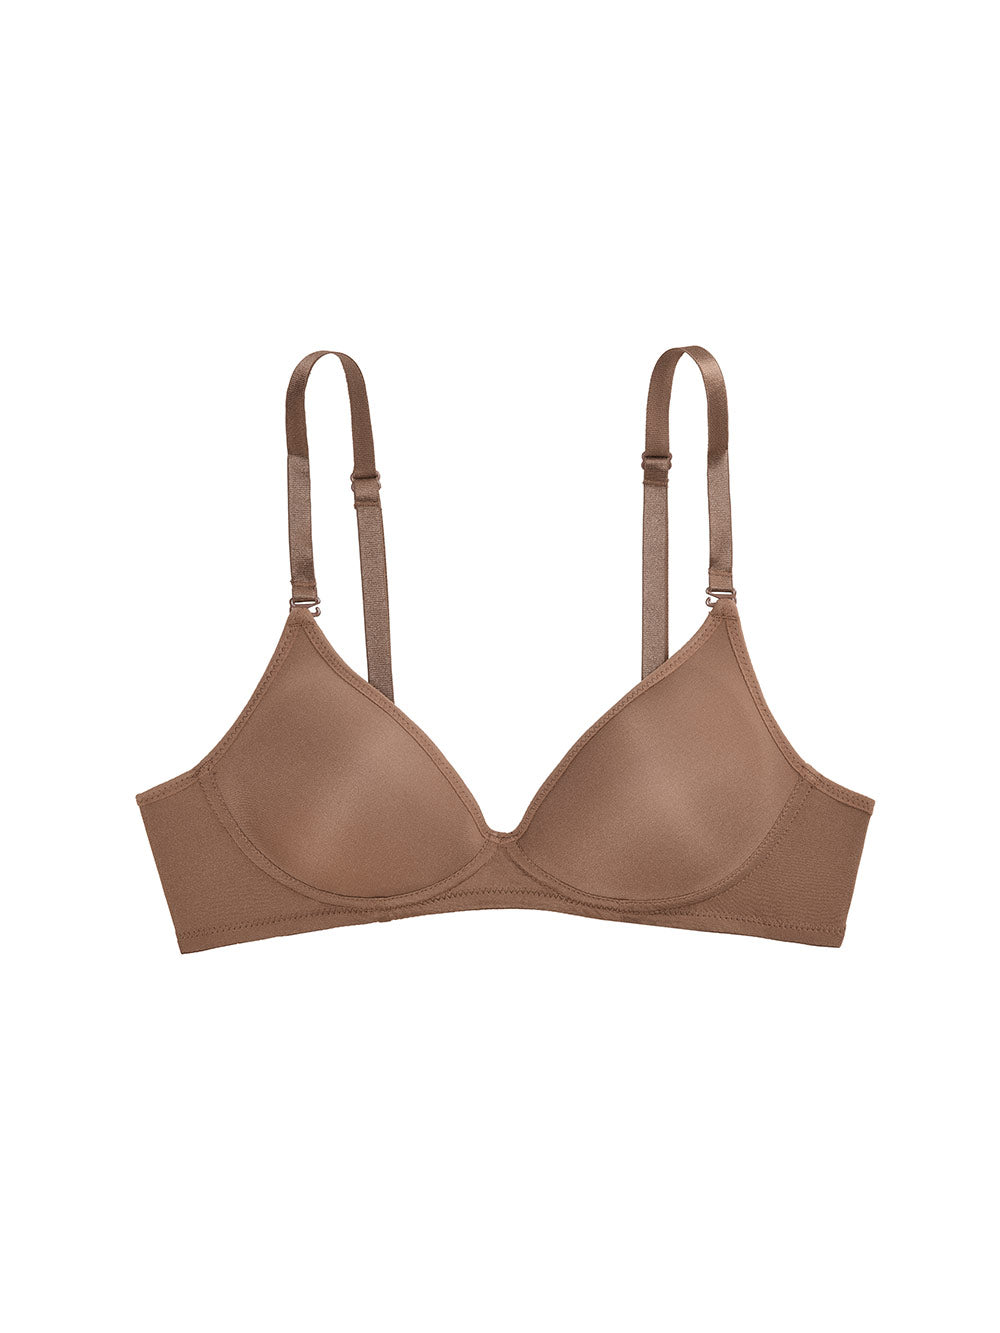 Zivame - Wire-free bras are the comfiest bras, agreed? But